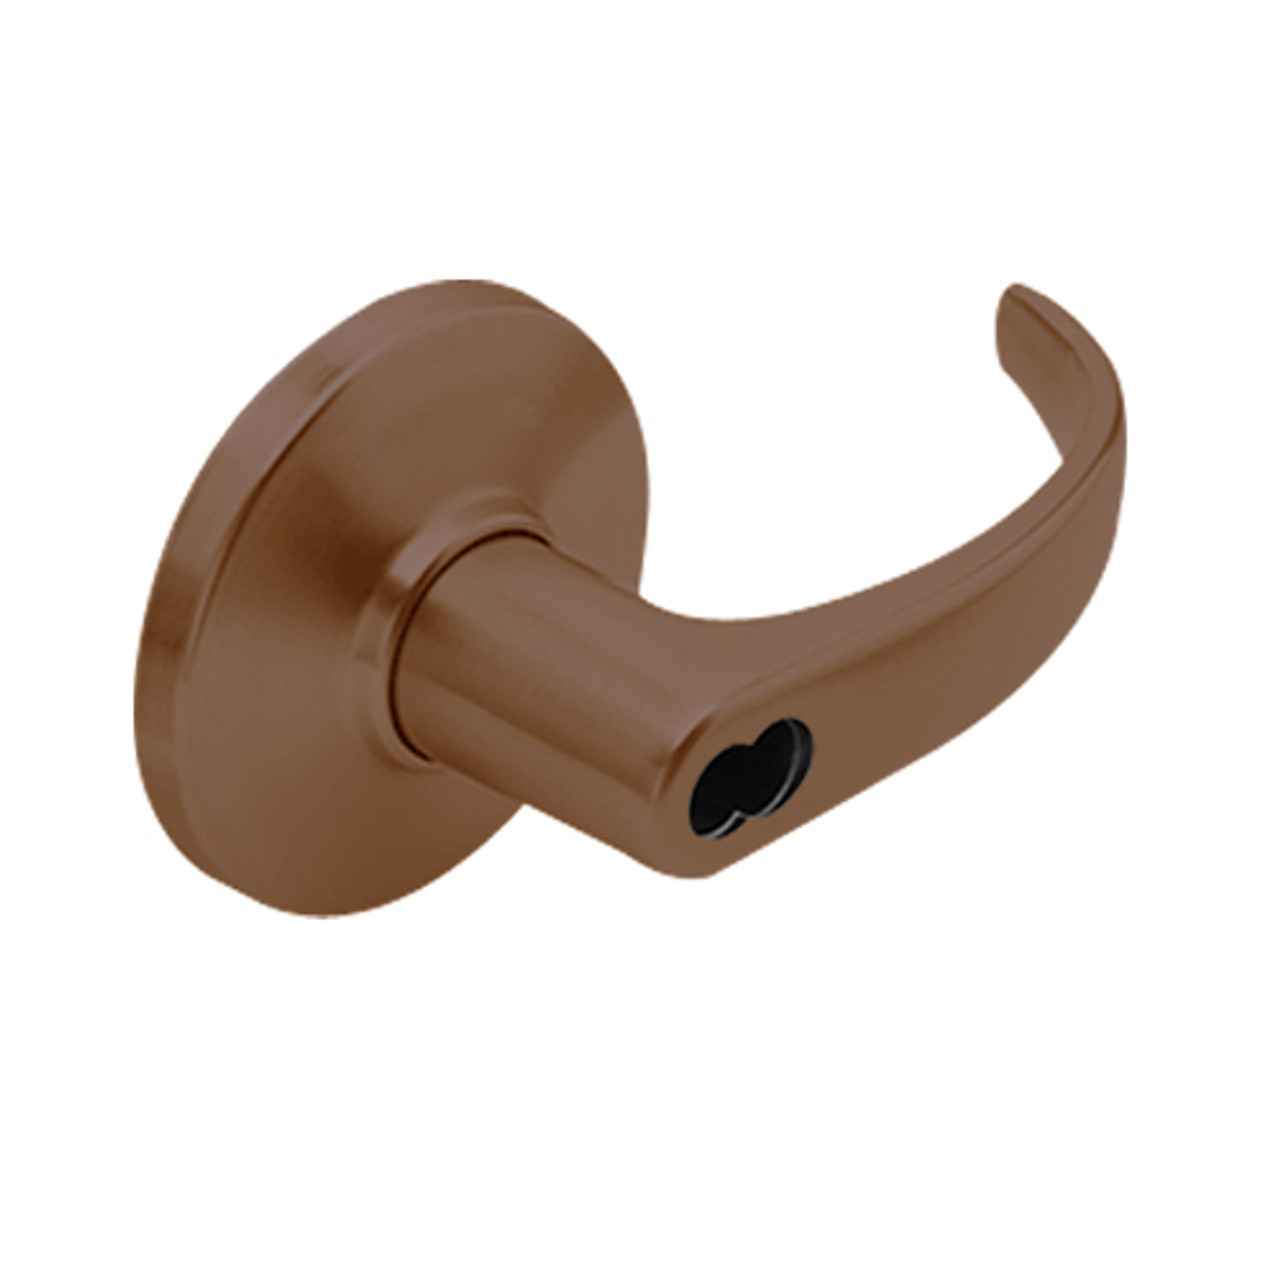 9K47E14DSTK690 Best 9K Series Service Station Cylindrical Lever Locks with Curved with Return Lever Design Accept 7 Pin Best Core in Dark Bronze